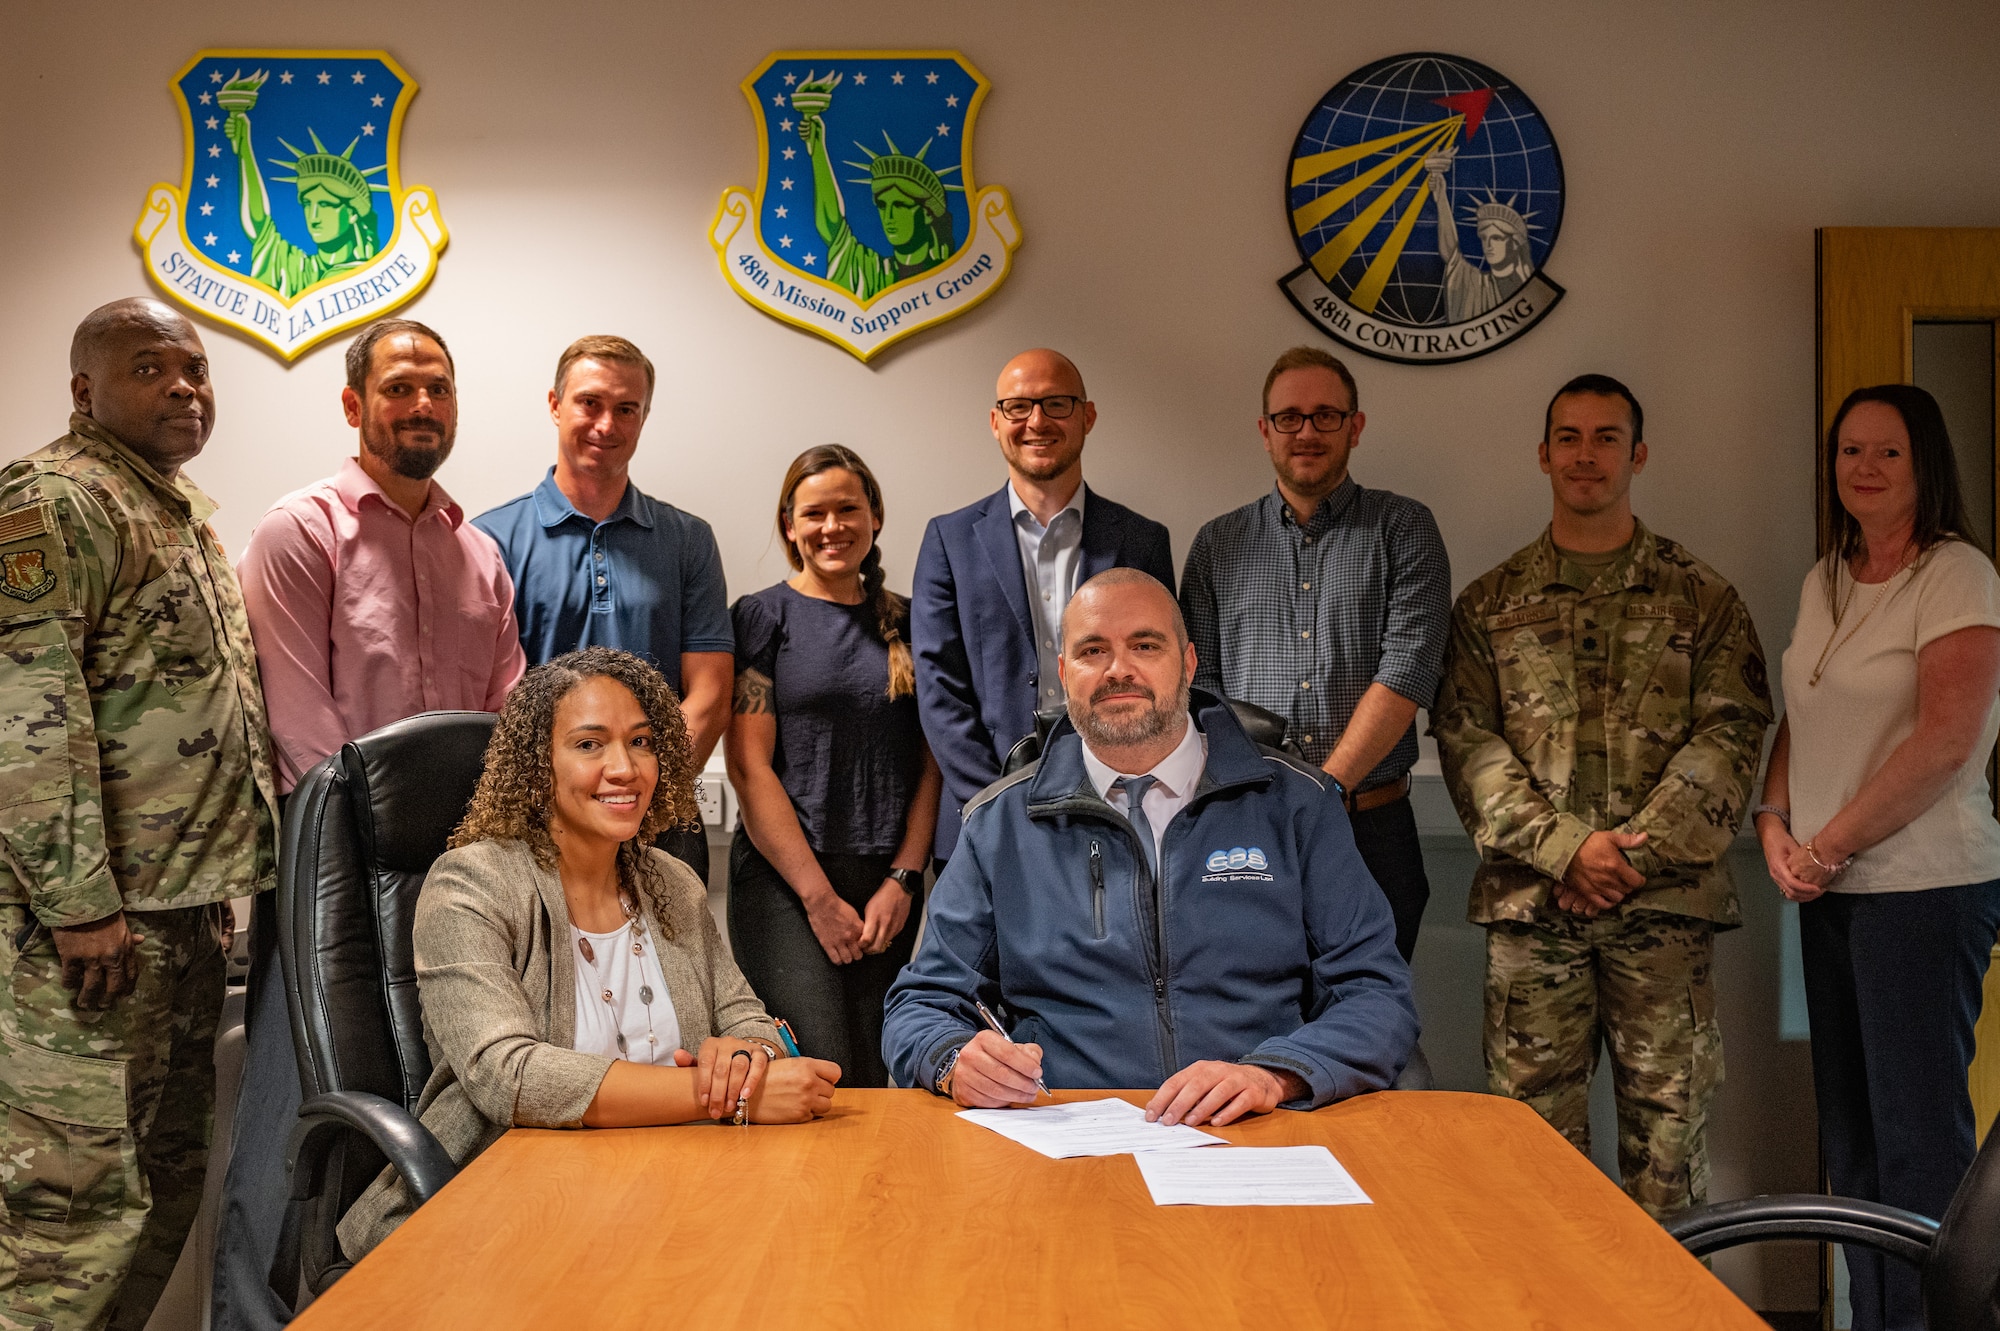 Members of the 48th Contracting Squadron at the signing of the first Simplified Acquisition of Base Engineer (SABER) Contract for a base within the United Kingdom at Royal Air Force Lakenheath, Sep 1, 2022. The SABER contract allows the 48th CONS to quickly evaluate and fulfill construction contracts. (U.S. Air Force photo by Staff Sgt. John Ennis)